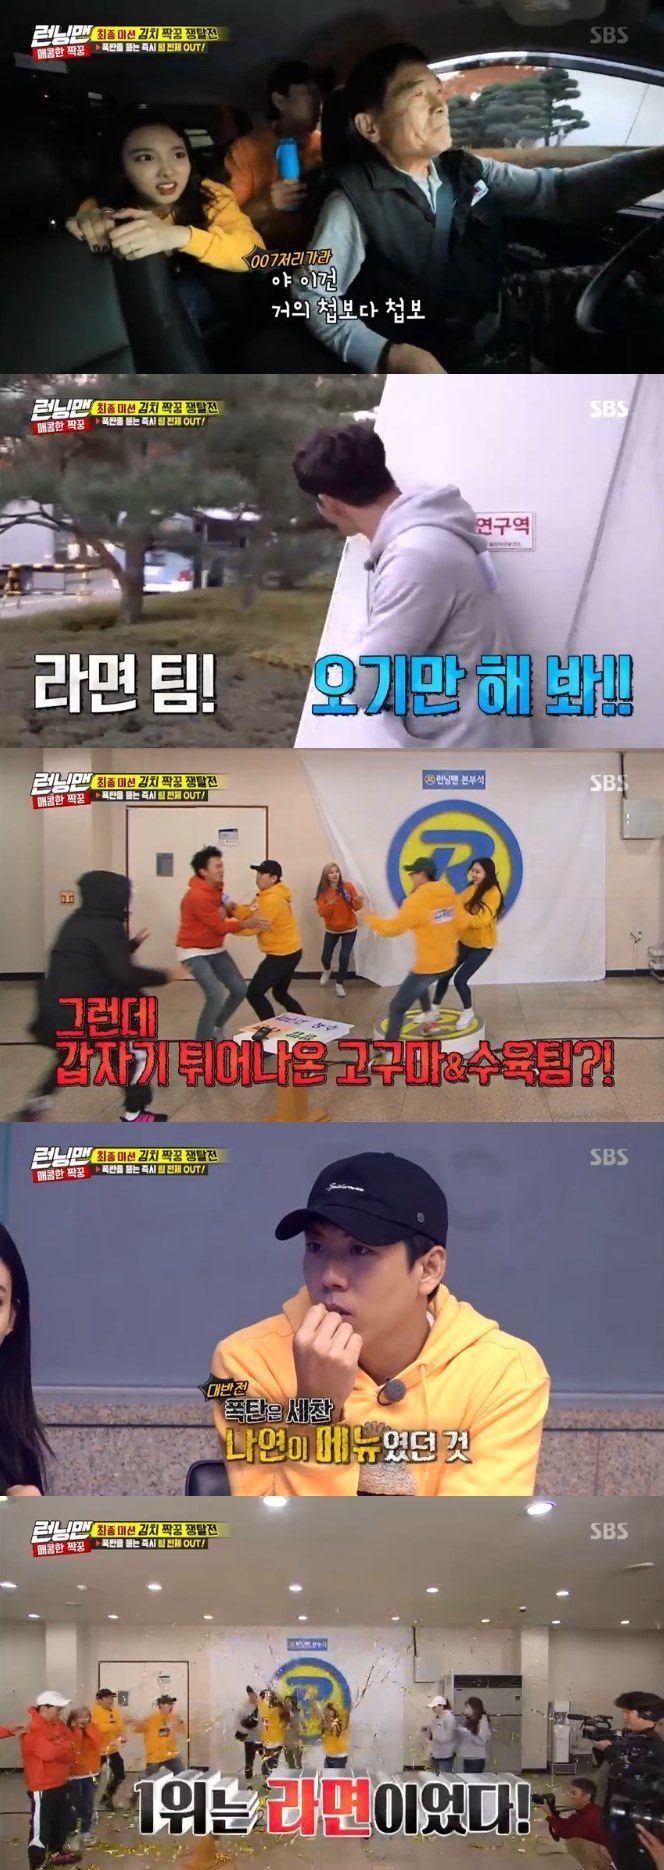 <p>2 days broadcast SBS Running Manin Running Man sister group TWICE the entire game as scramble. TWICE in the last 4 Julys people X as joined 1 year anniversary’ special guest surprise appearances by school the and comic dance showdown, such as the active with numerous topics to give birth, and the ‘Running Man’ Year of the pandas, star-crowned.</p><p>This day, kimchi paired Peek-A-Boo contend, Adam becomes TWICE and the Running Man members. Generation stars kimchi and well matched the food survey results on Sweet potato, Rice, Can Education, to a team of confrontation unfolded. Most members are the answer.; if the team started looking.</p><p>What is left are called the team and the Sweet potato team, Can Education of the team fight. If a team is passing the vehicle up to take to the headquarters as the hidden people. Me and three as passengers in the car to sneak in the headquarters seat to go up.</p><p>But Headquarters analysis yen Sweet potato team Ive been hiding it. Sweet potato team of the analysis is the amount and more like the name of the tag to tear the bomb, I notice. I smoke until the end of the menu you watched the final you won.</p>